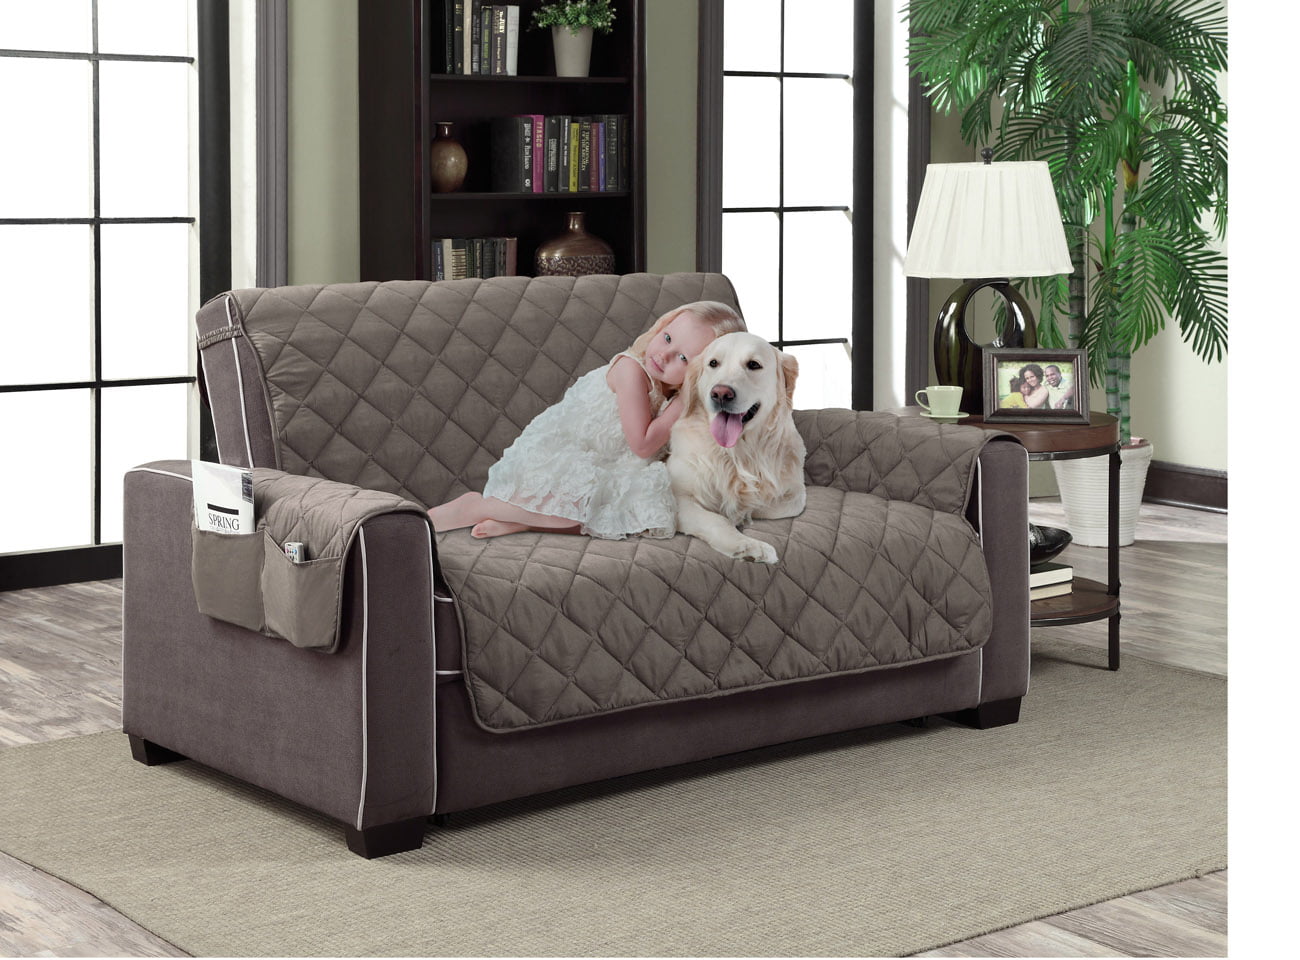 Home Dynamix Slipcovers All Season, Leather Couch Covers To Protect From Cats